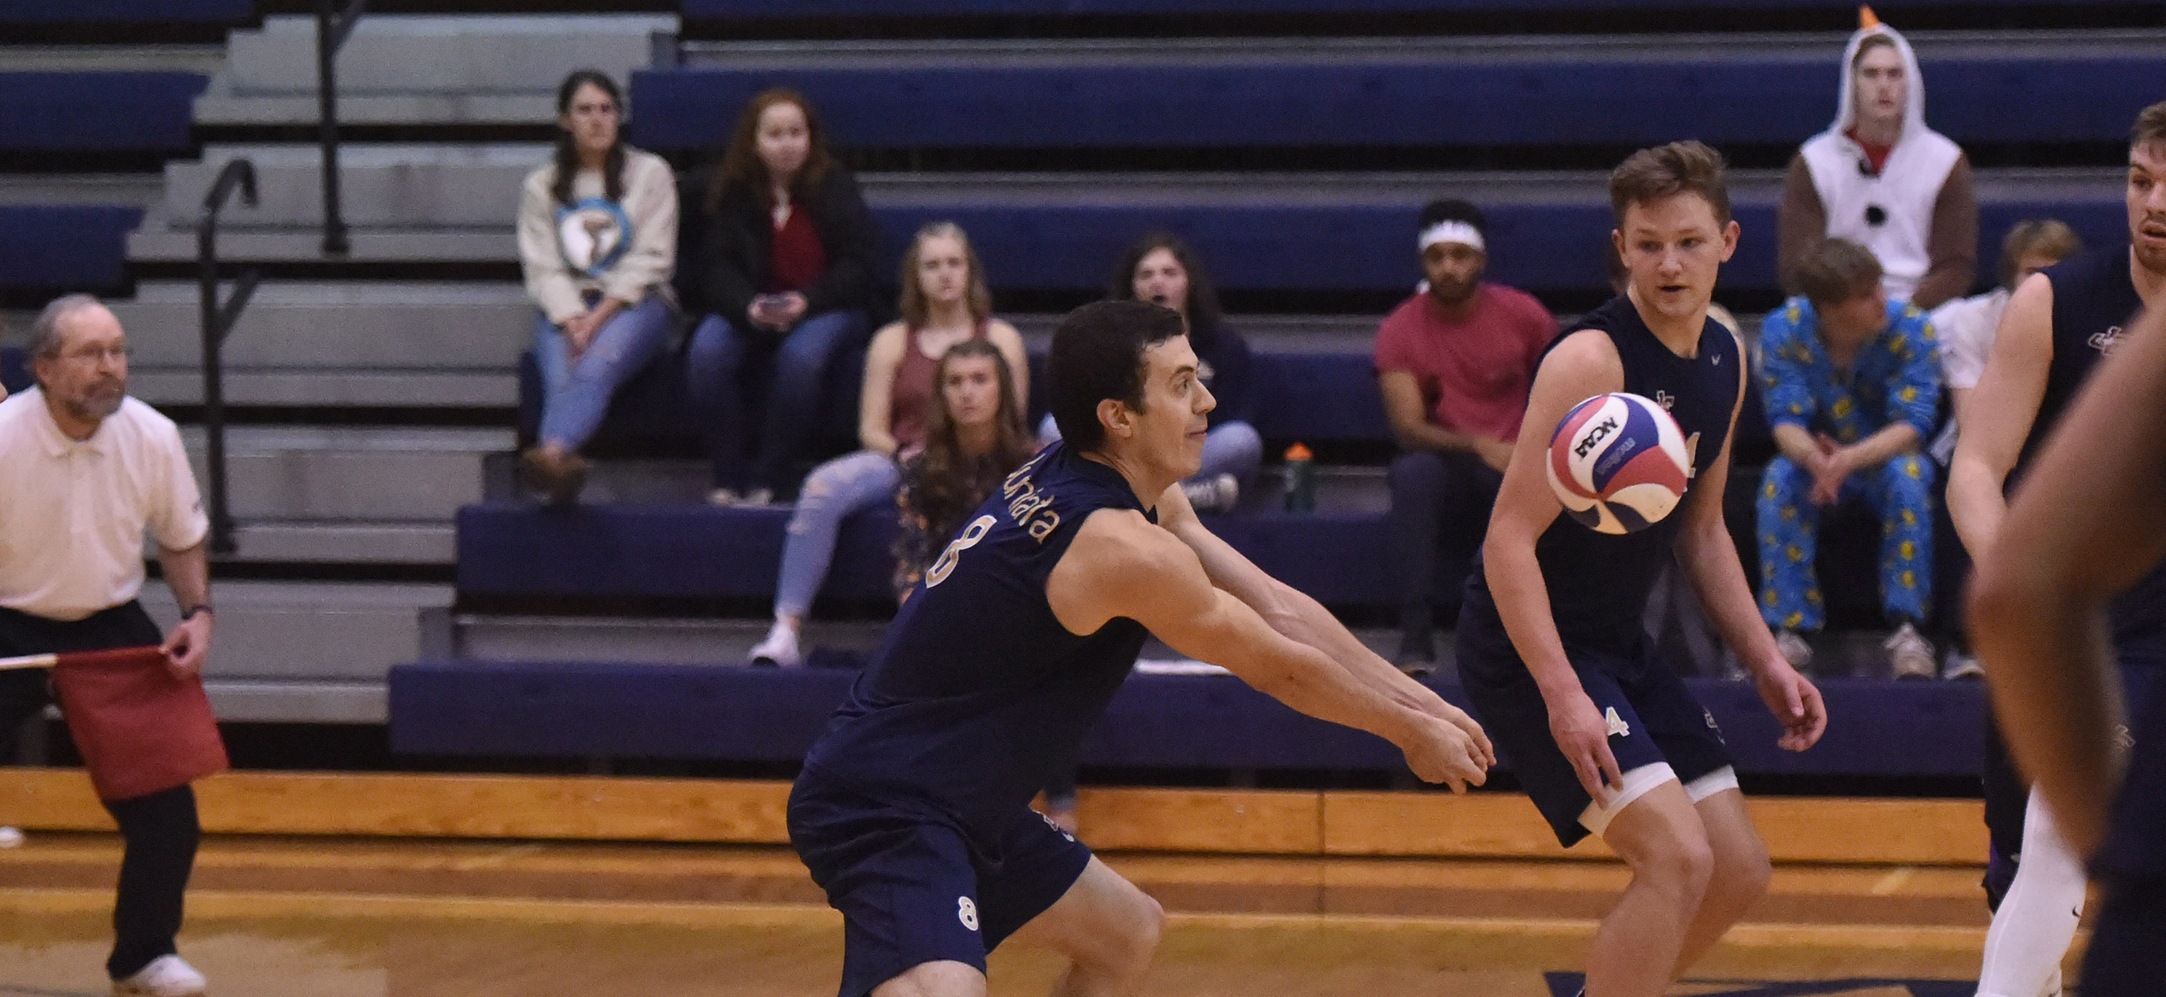 Men's Volleyball Wins Five-Set Thriller Over Southern Virginia